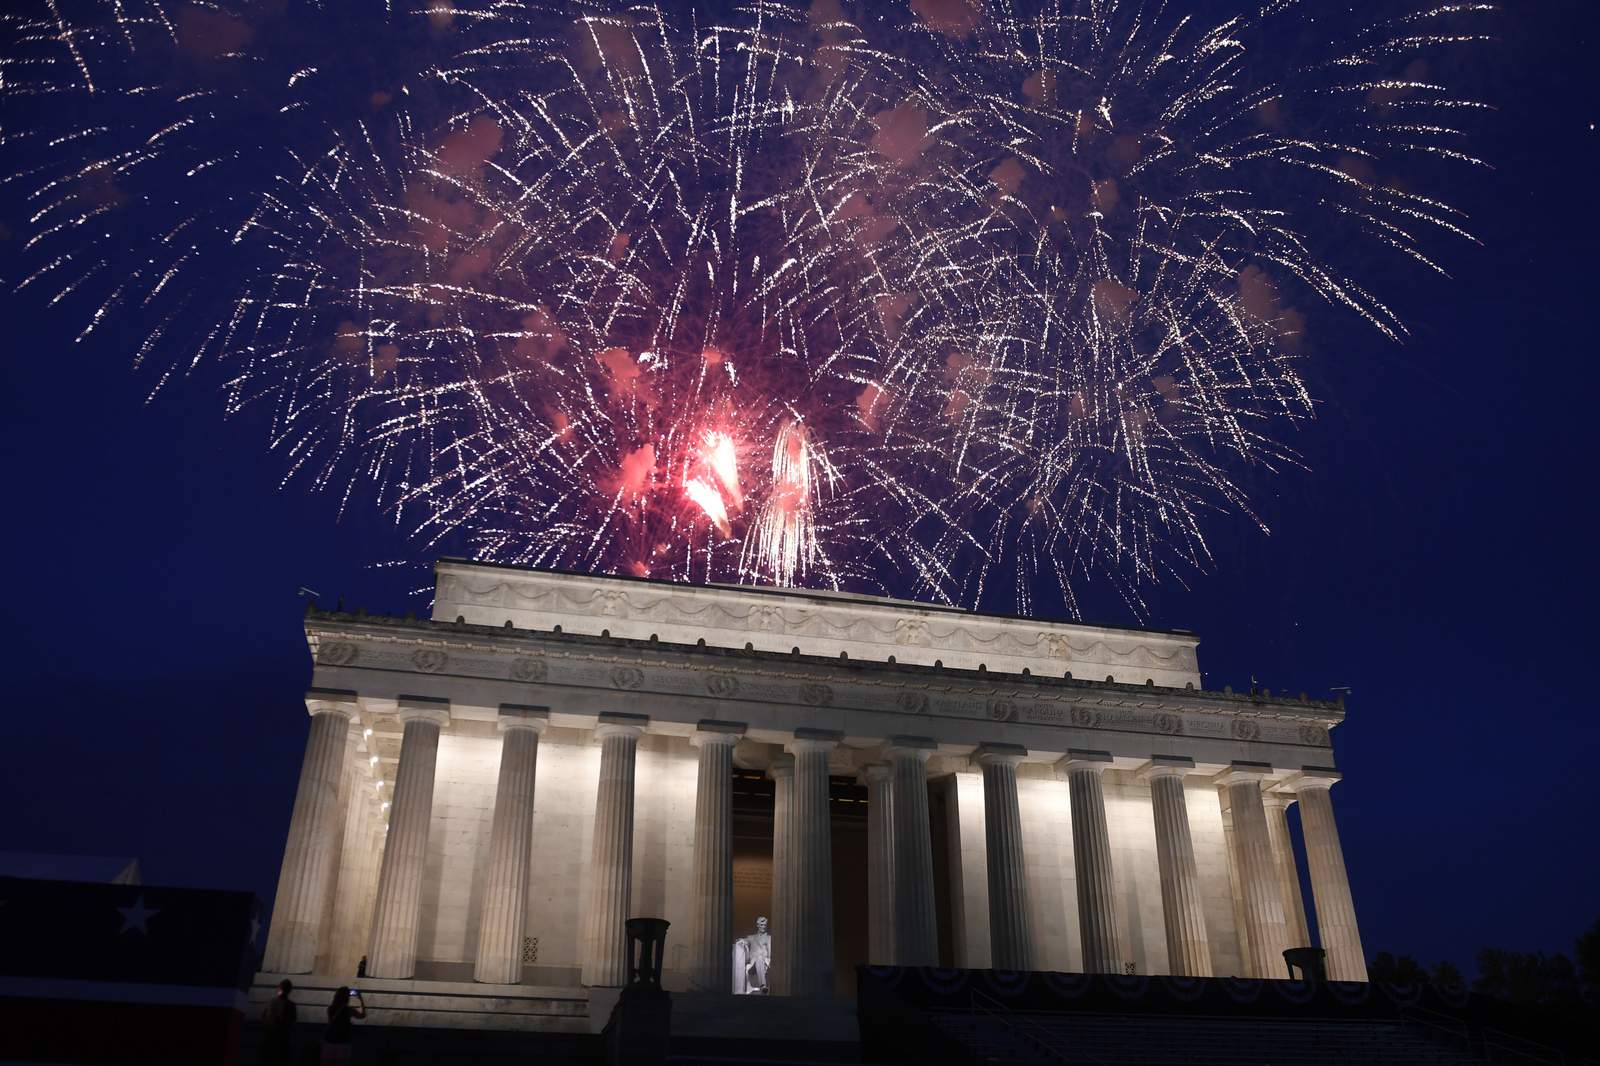 Trump's DC July 4th: fireworks and face masks